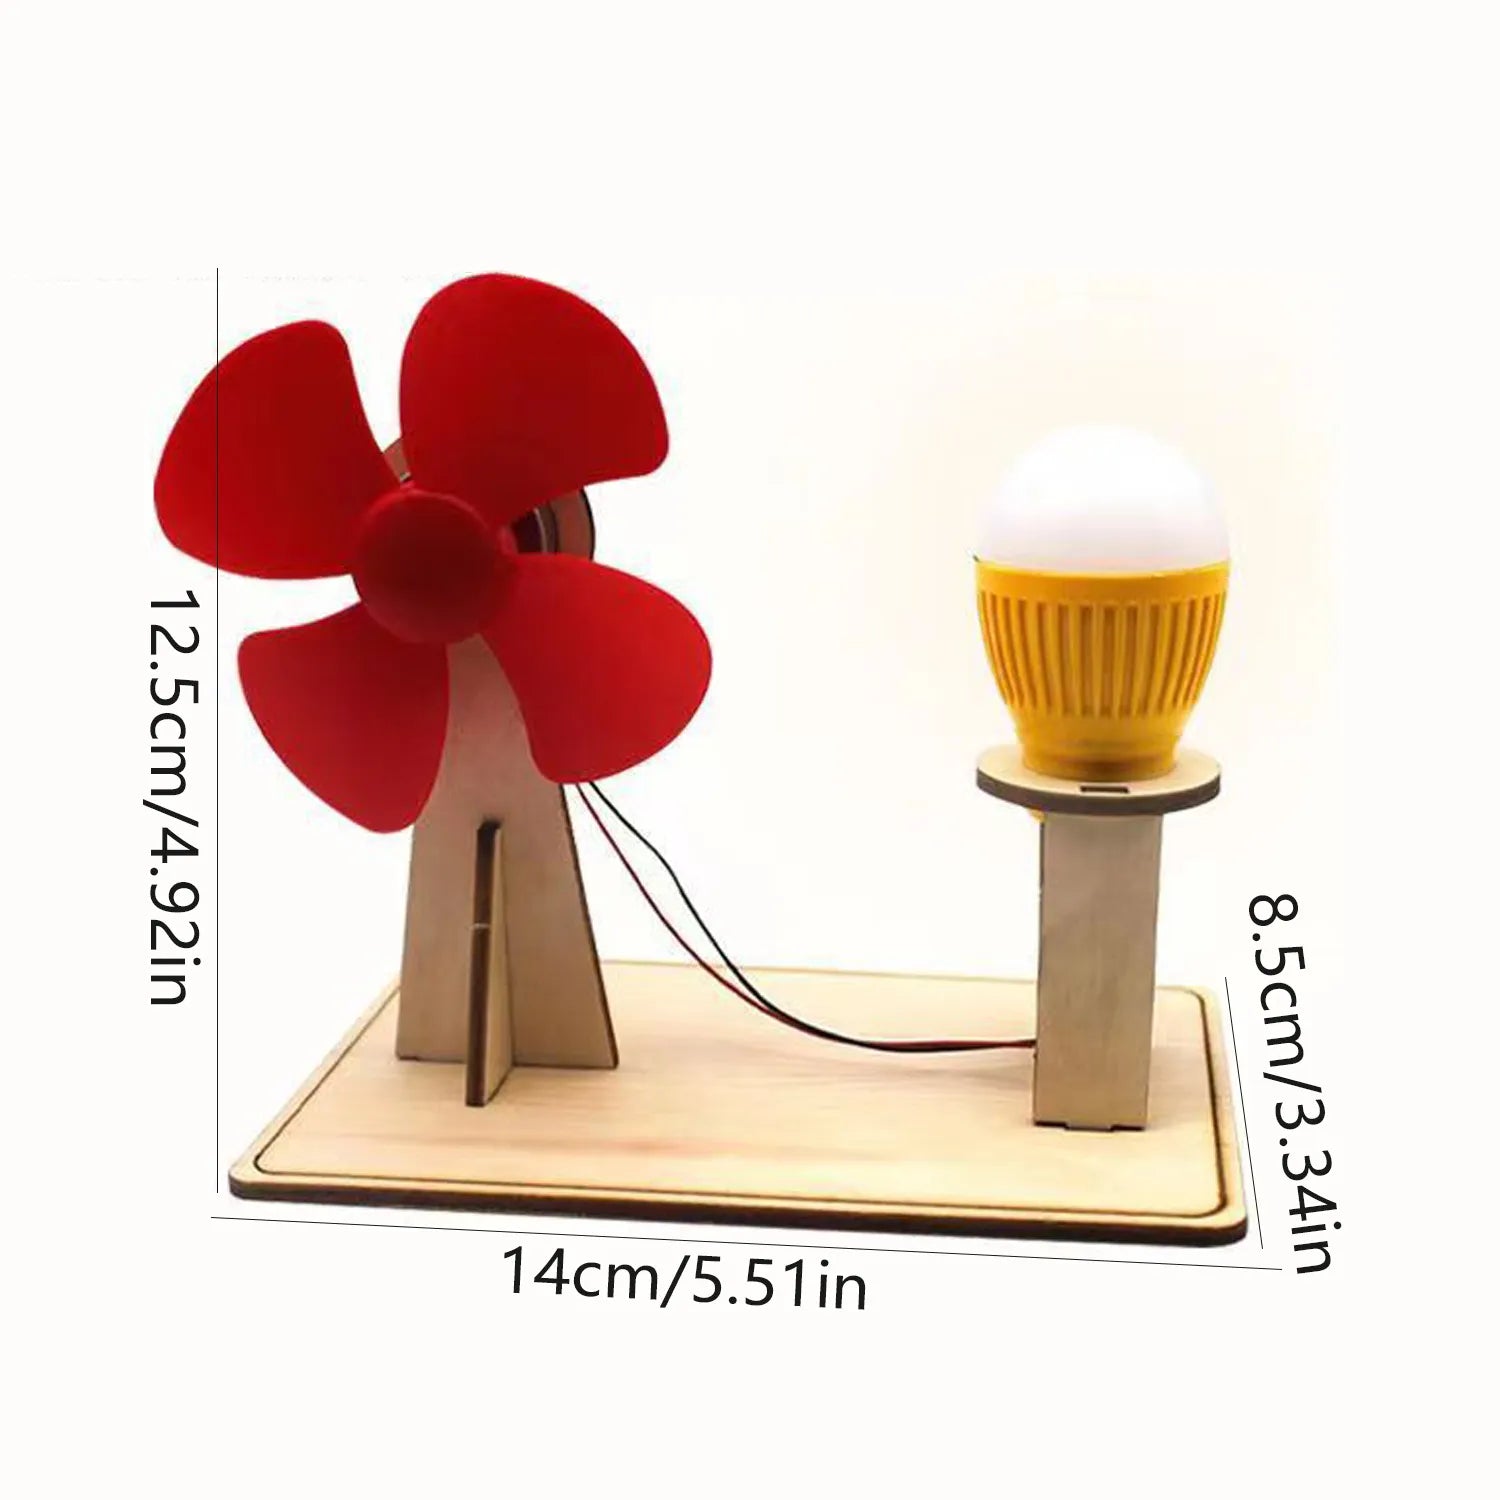 Wooden Wind Generator Model Kids Science Toy Funny Technology Physics Kit Educational Toys for Children Learning Toy Little Artist Drawing Hub